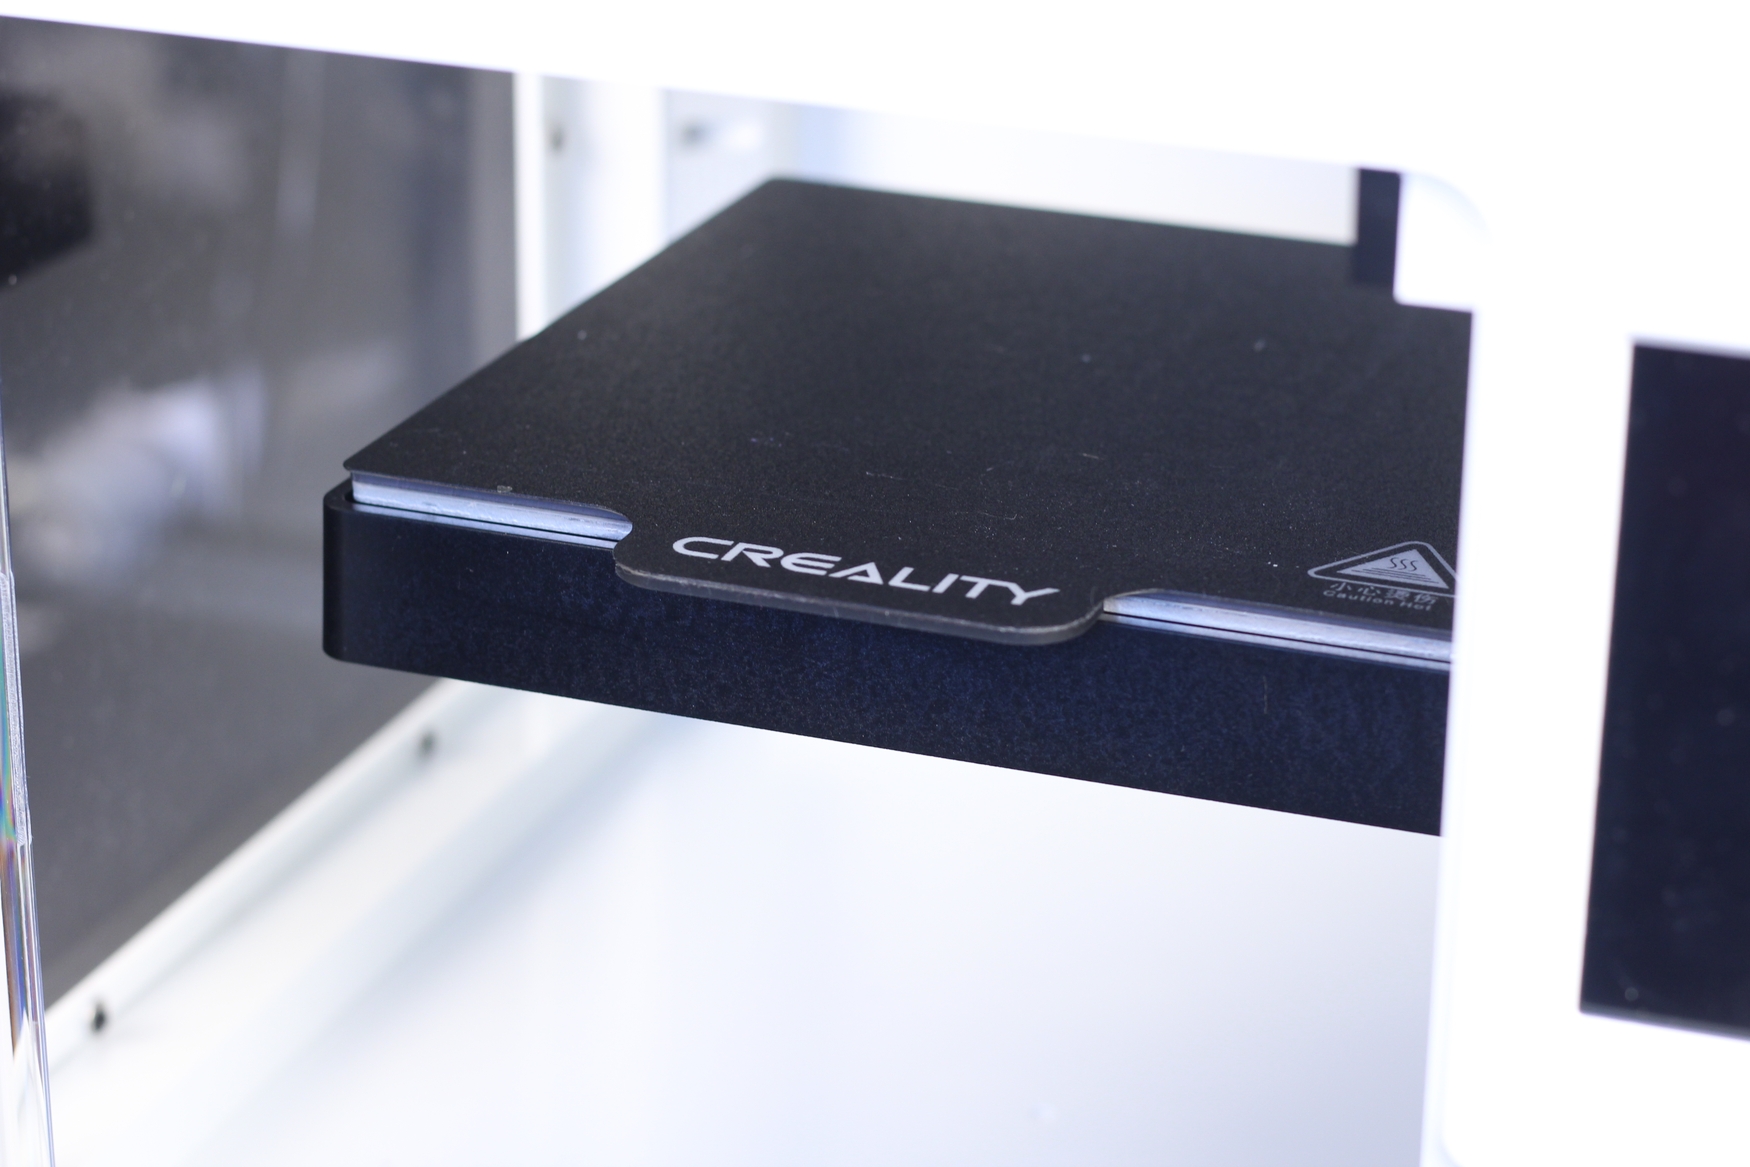 Sermoon V1 Pro Heated Bed1 | Creality Sermoon V1 Pro Review: Can it deliver on its promises?